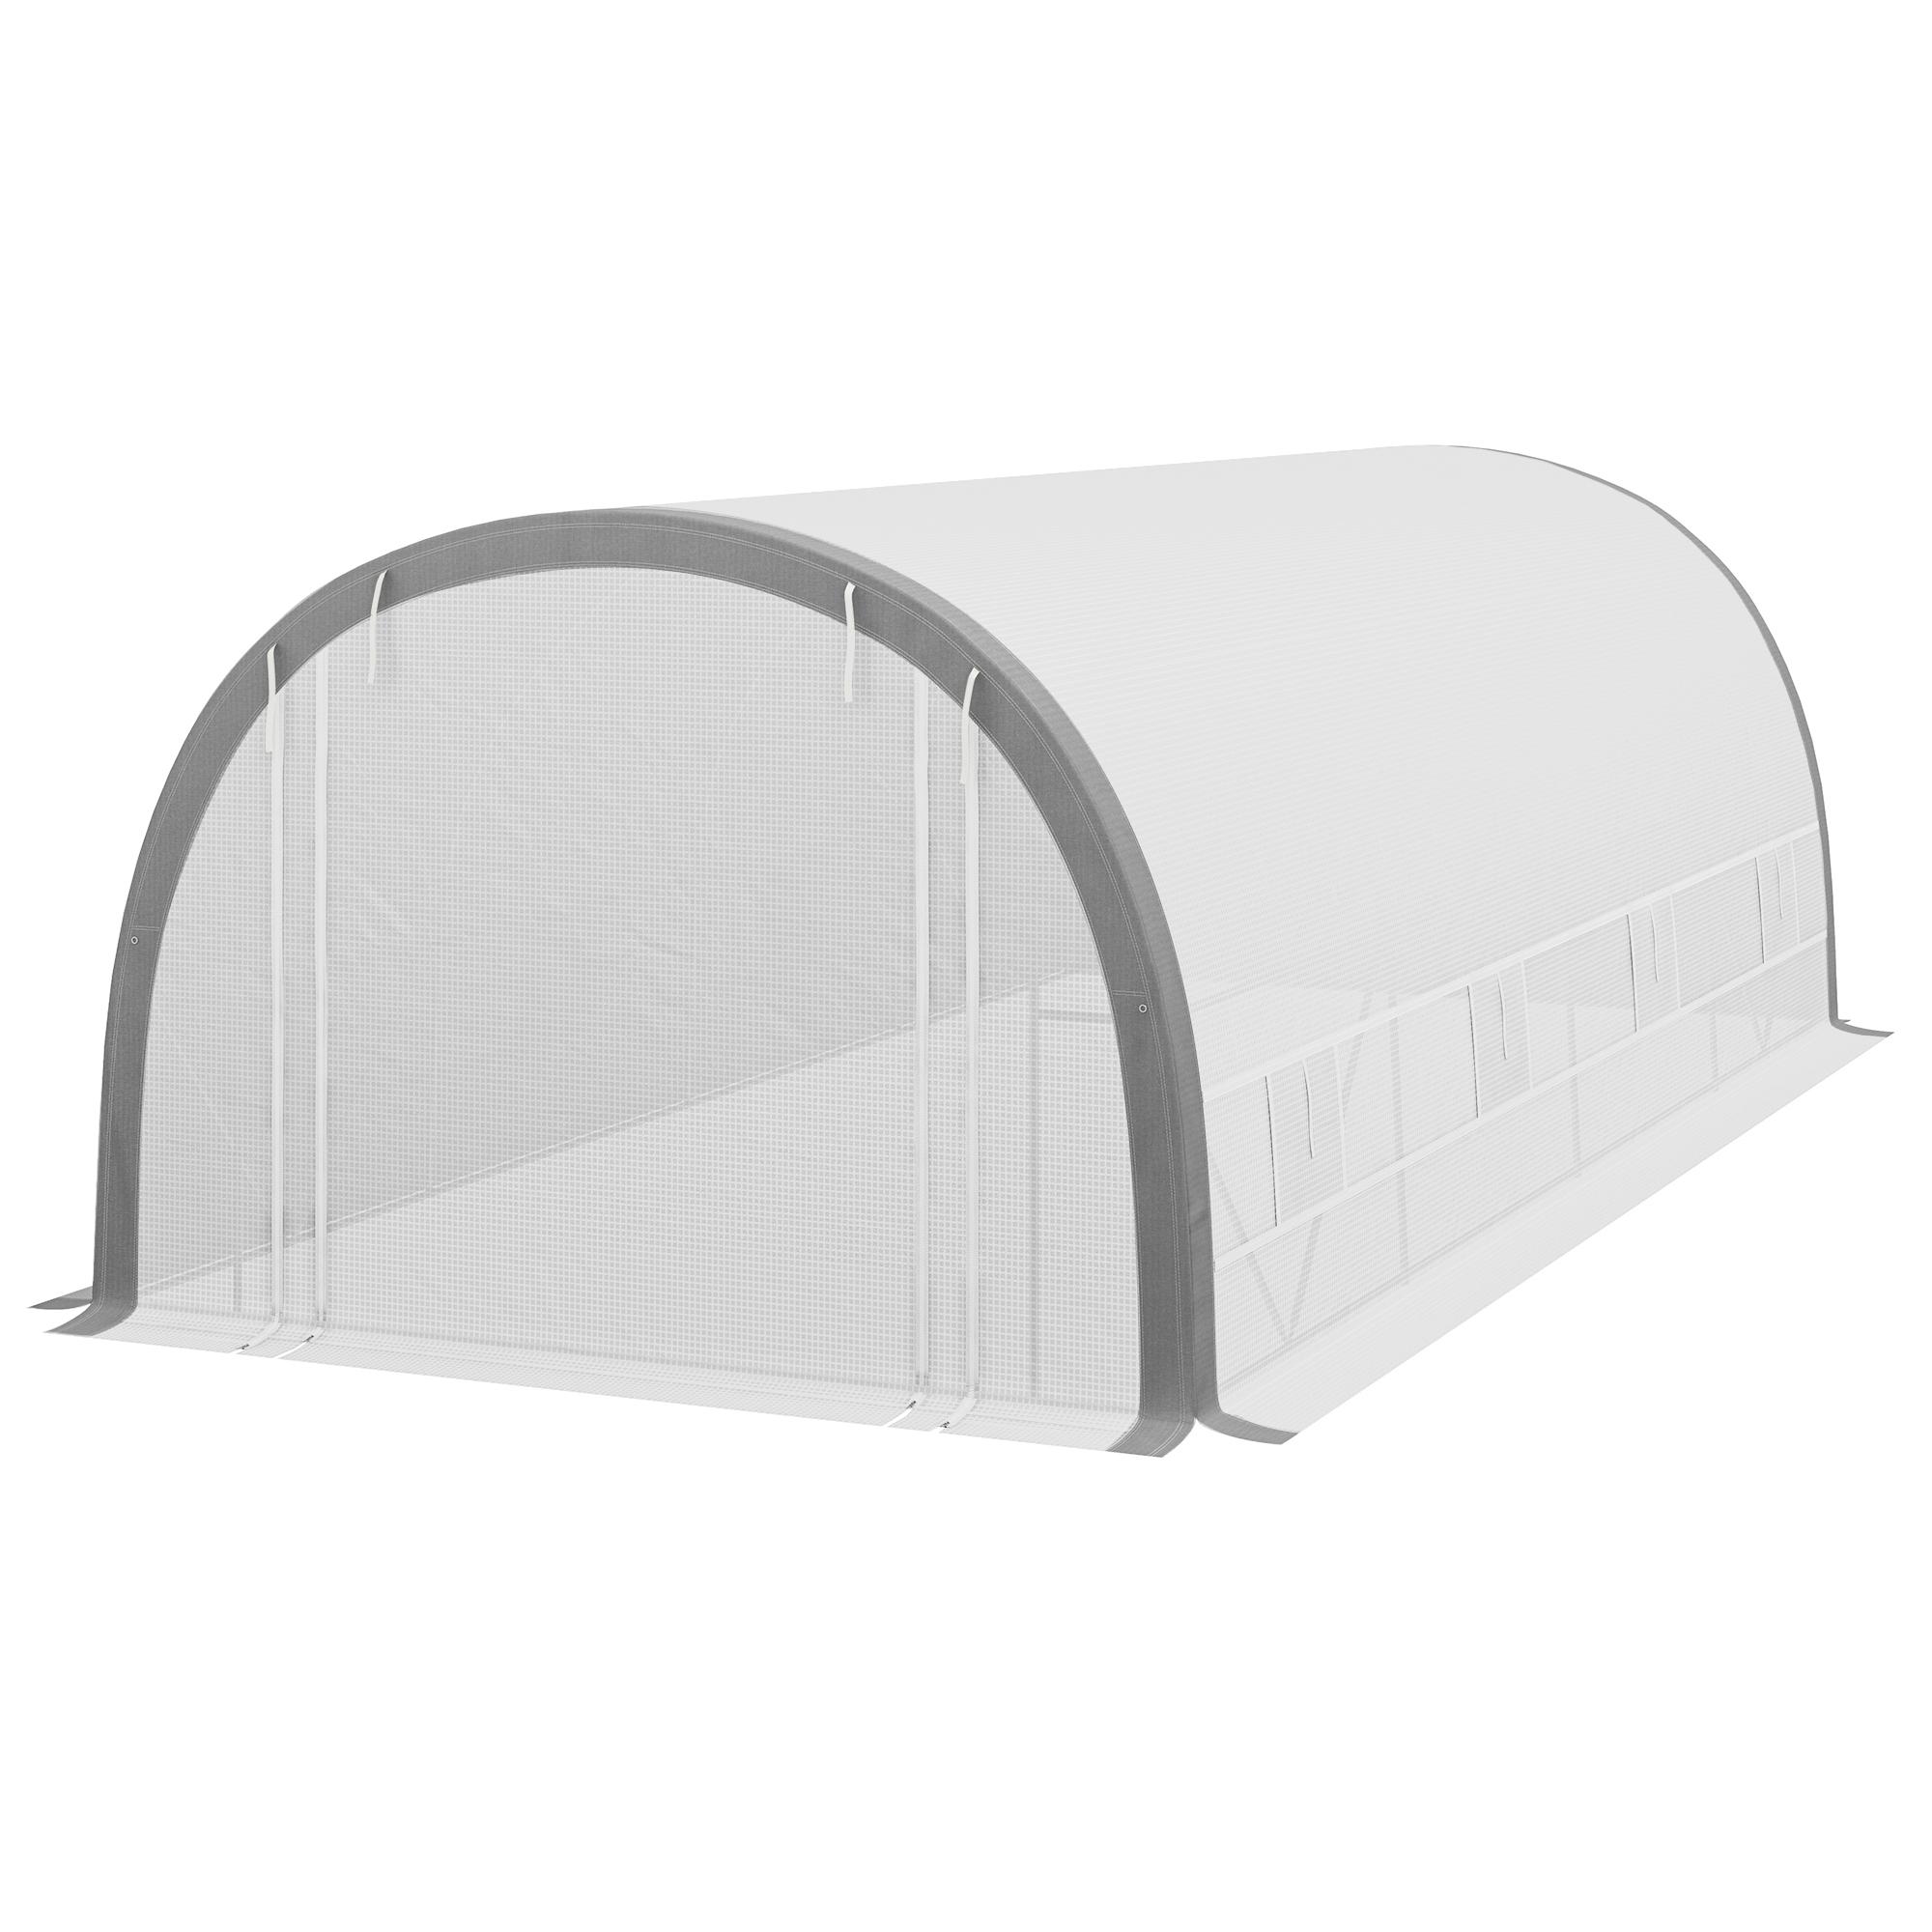 Outsunny 6 X 3(m) Polytunnel Greenhouse With Upgraded Structure, Mesh Door And Windows, 15 Plant Labels, White